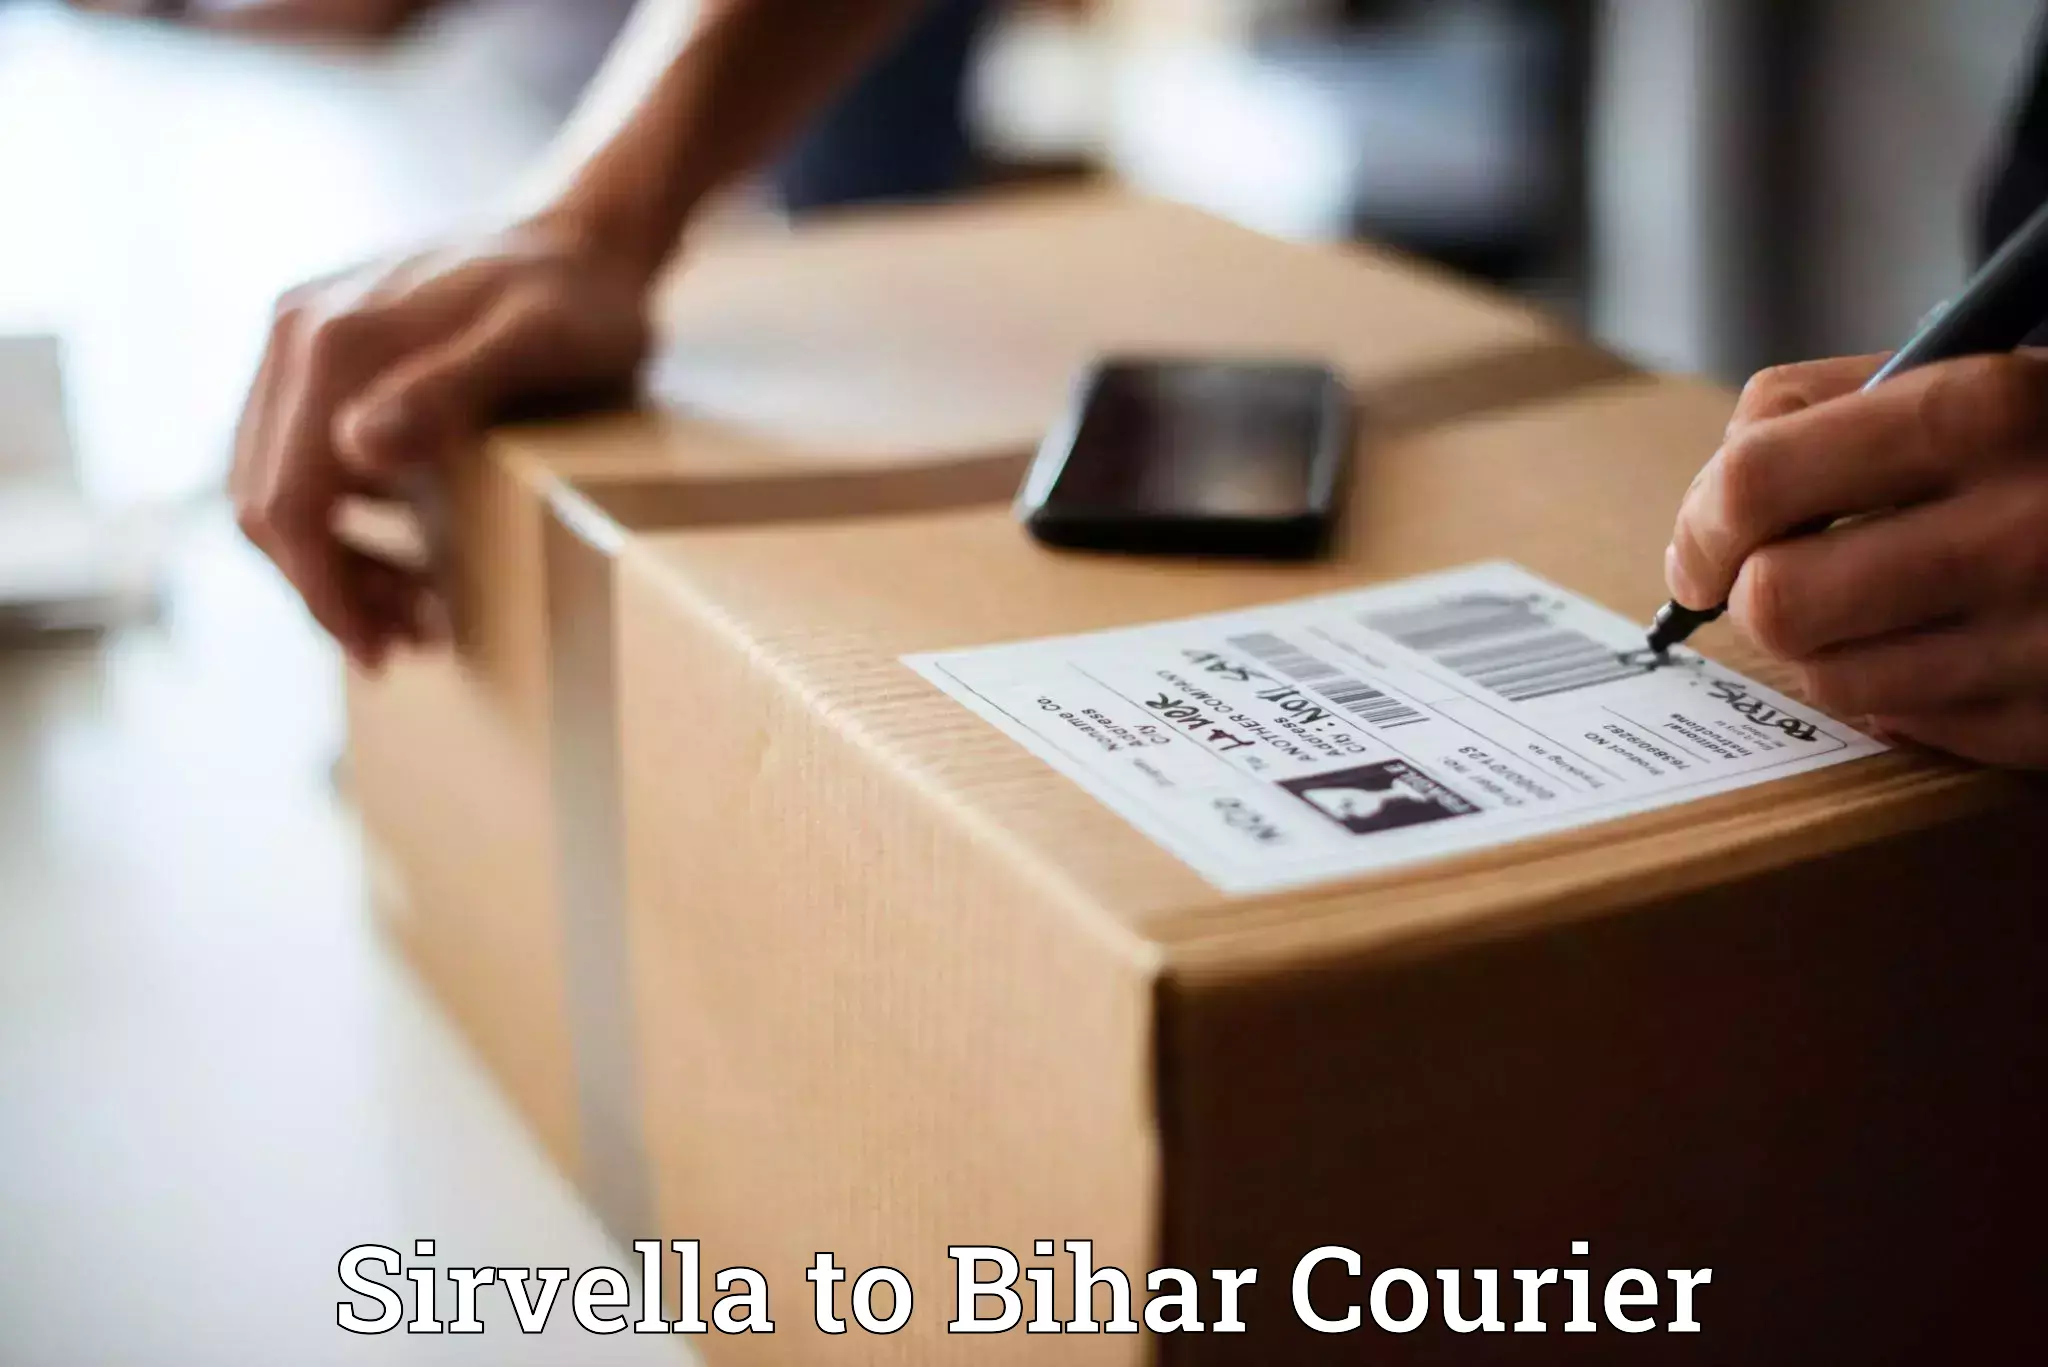 Courier service efficiency Sirvella to Phulparas